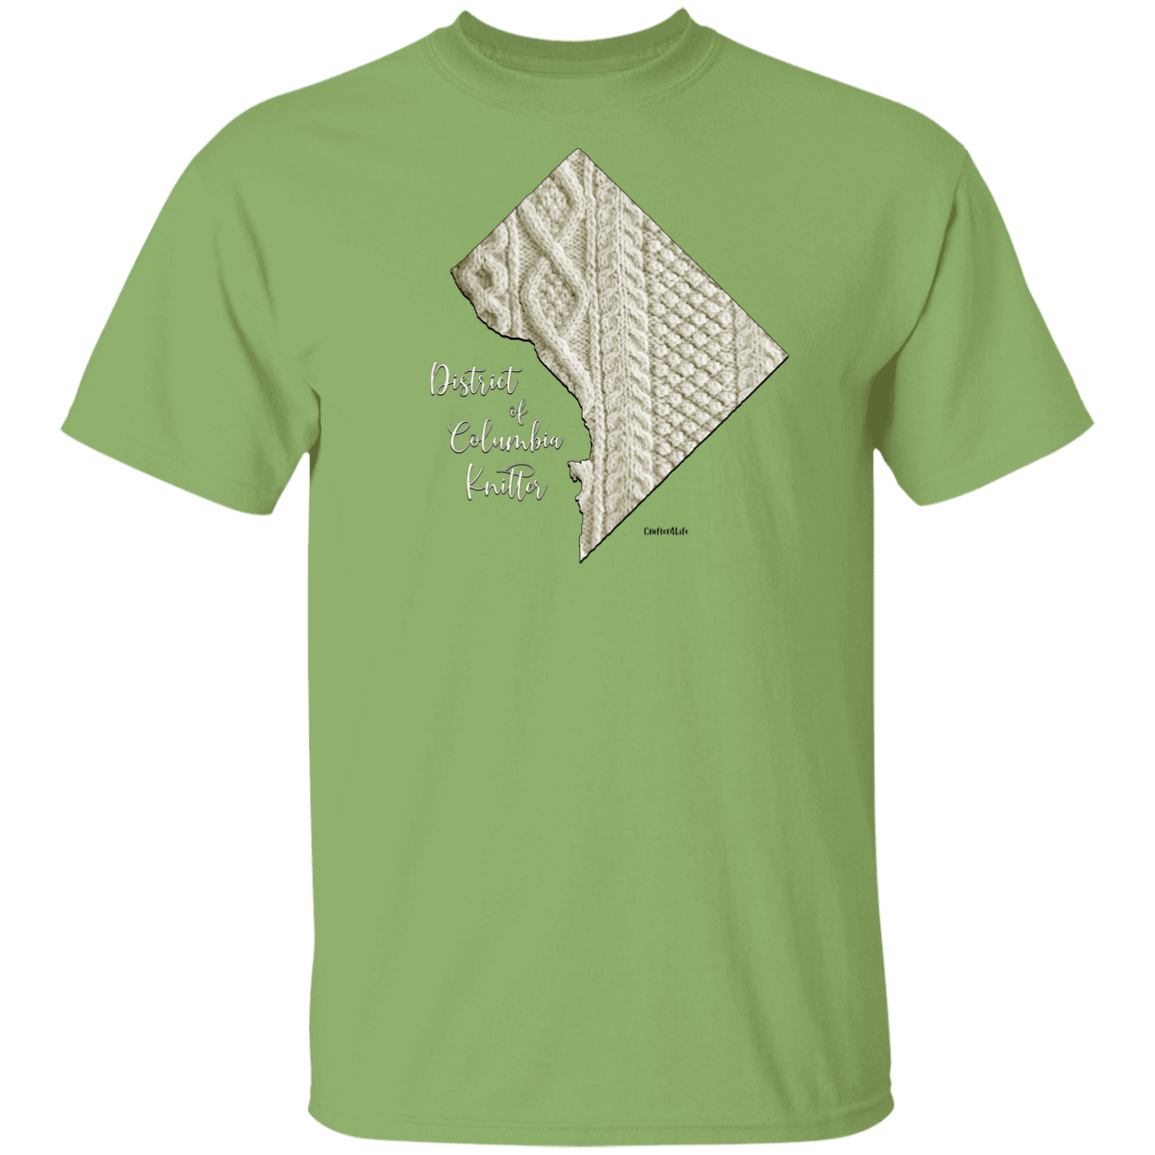 District of Columbia Knitter T-Shirt